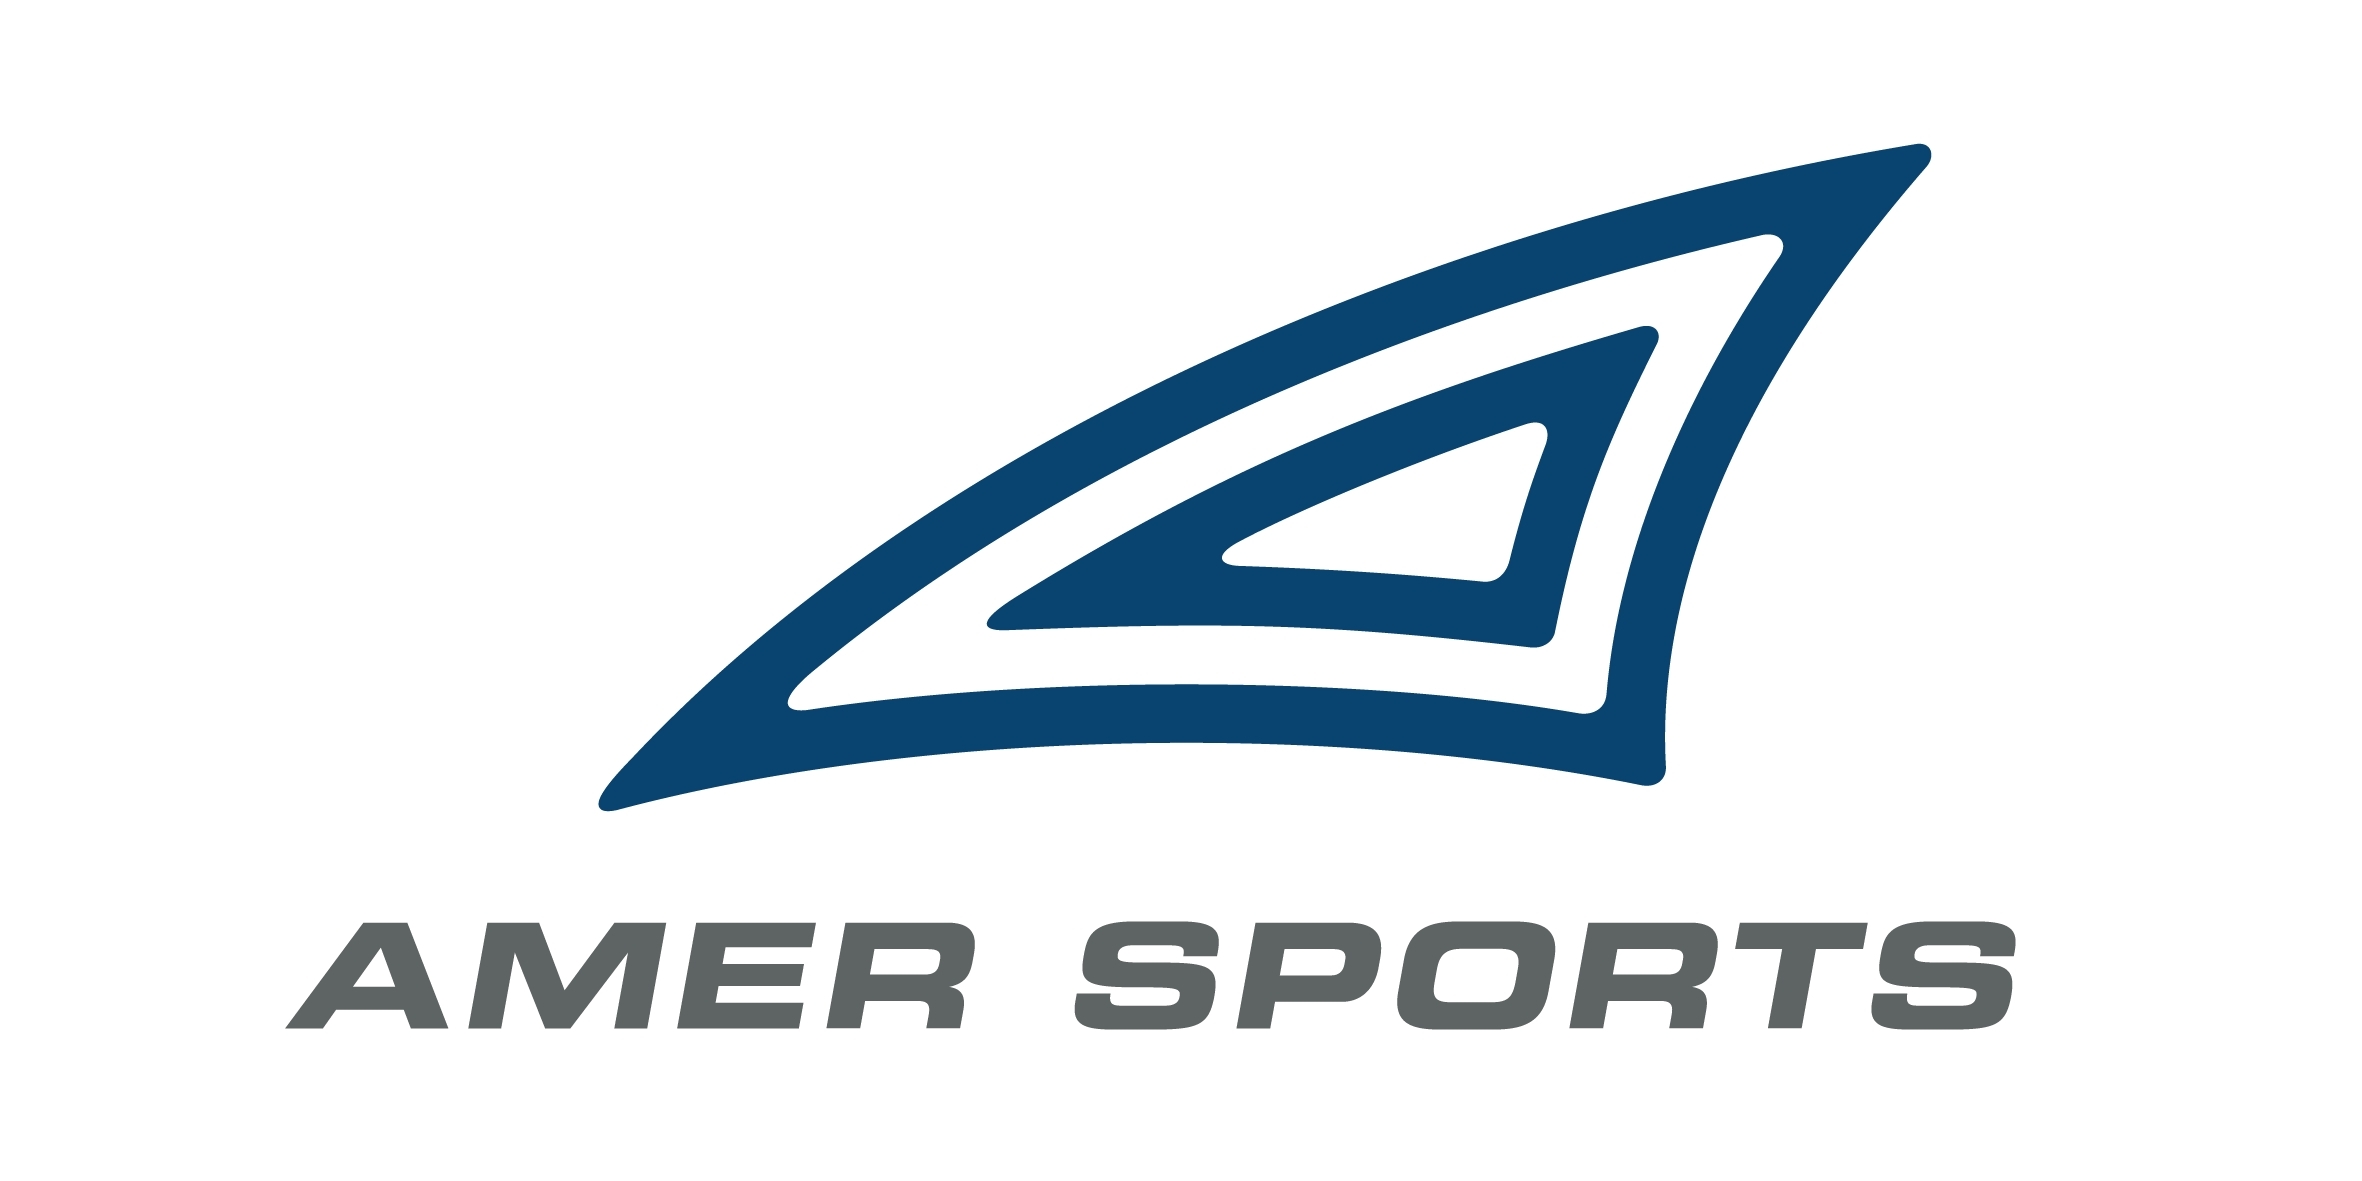 Amer Sports Names Retail Industry Executive Stuart Haselden Ceo Of Arc Teryx Business Wire